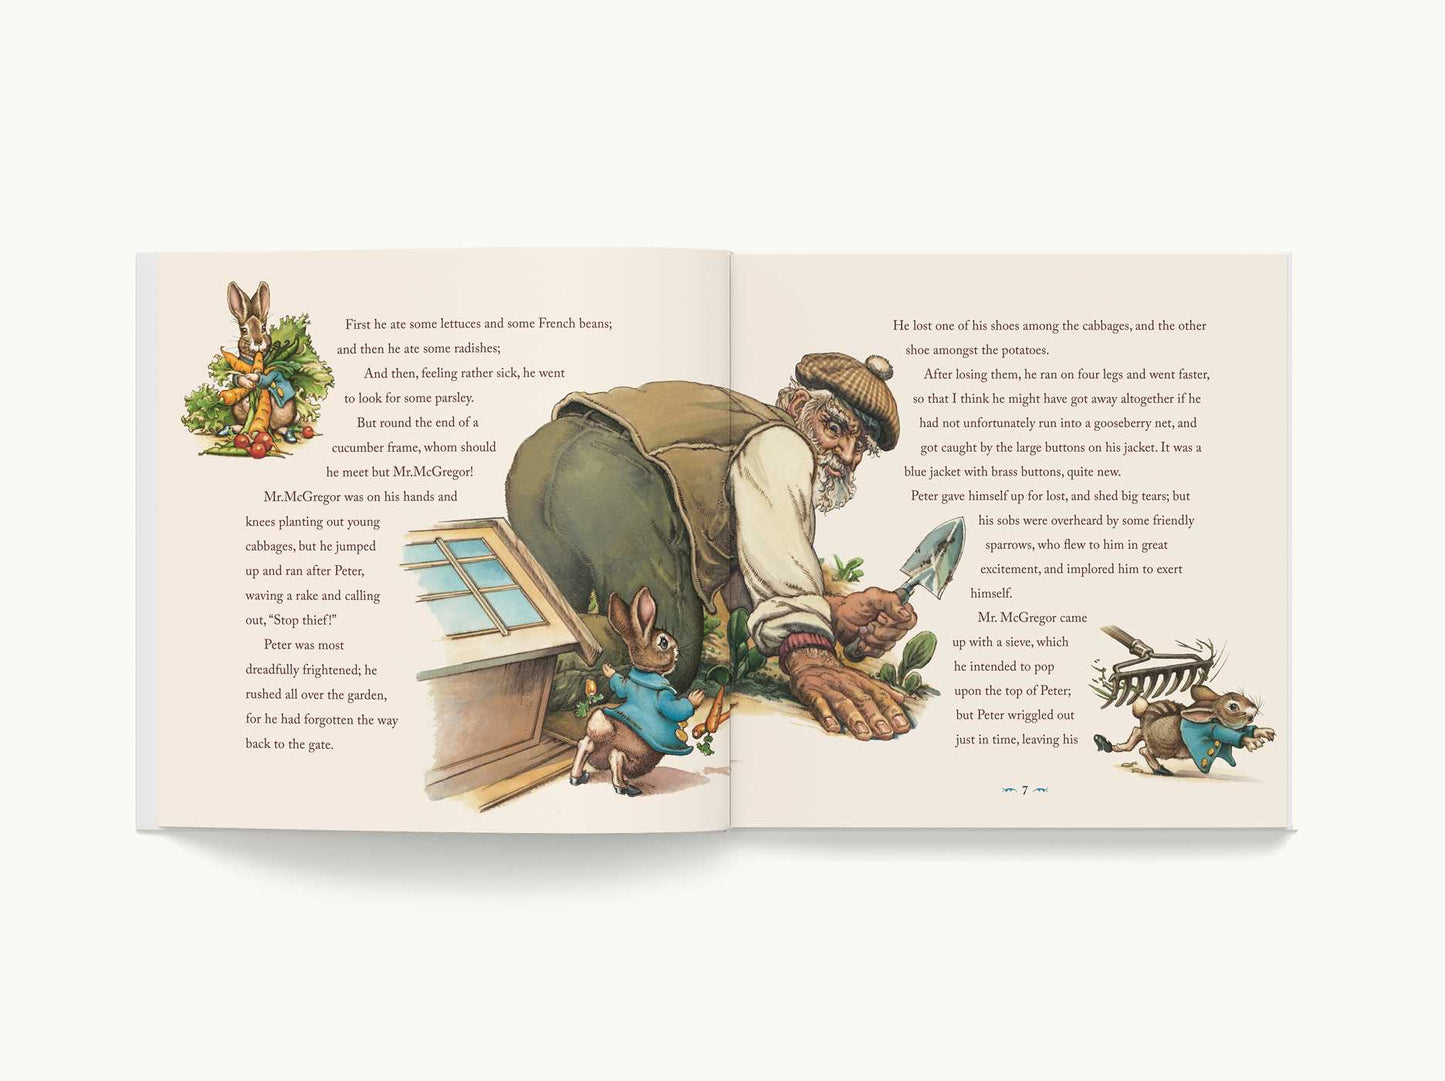 The Classic Tale of Peter Rabbit Heirloom Edition: The Classic Edition Hardcover with Audio CD Narrated by Jeff Bridges